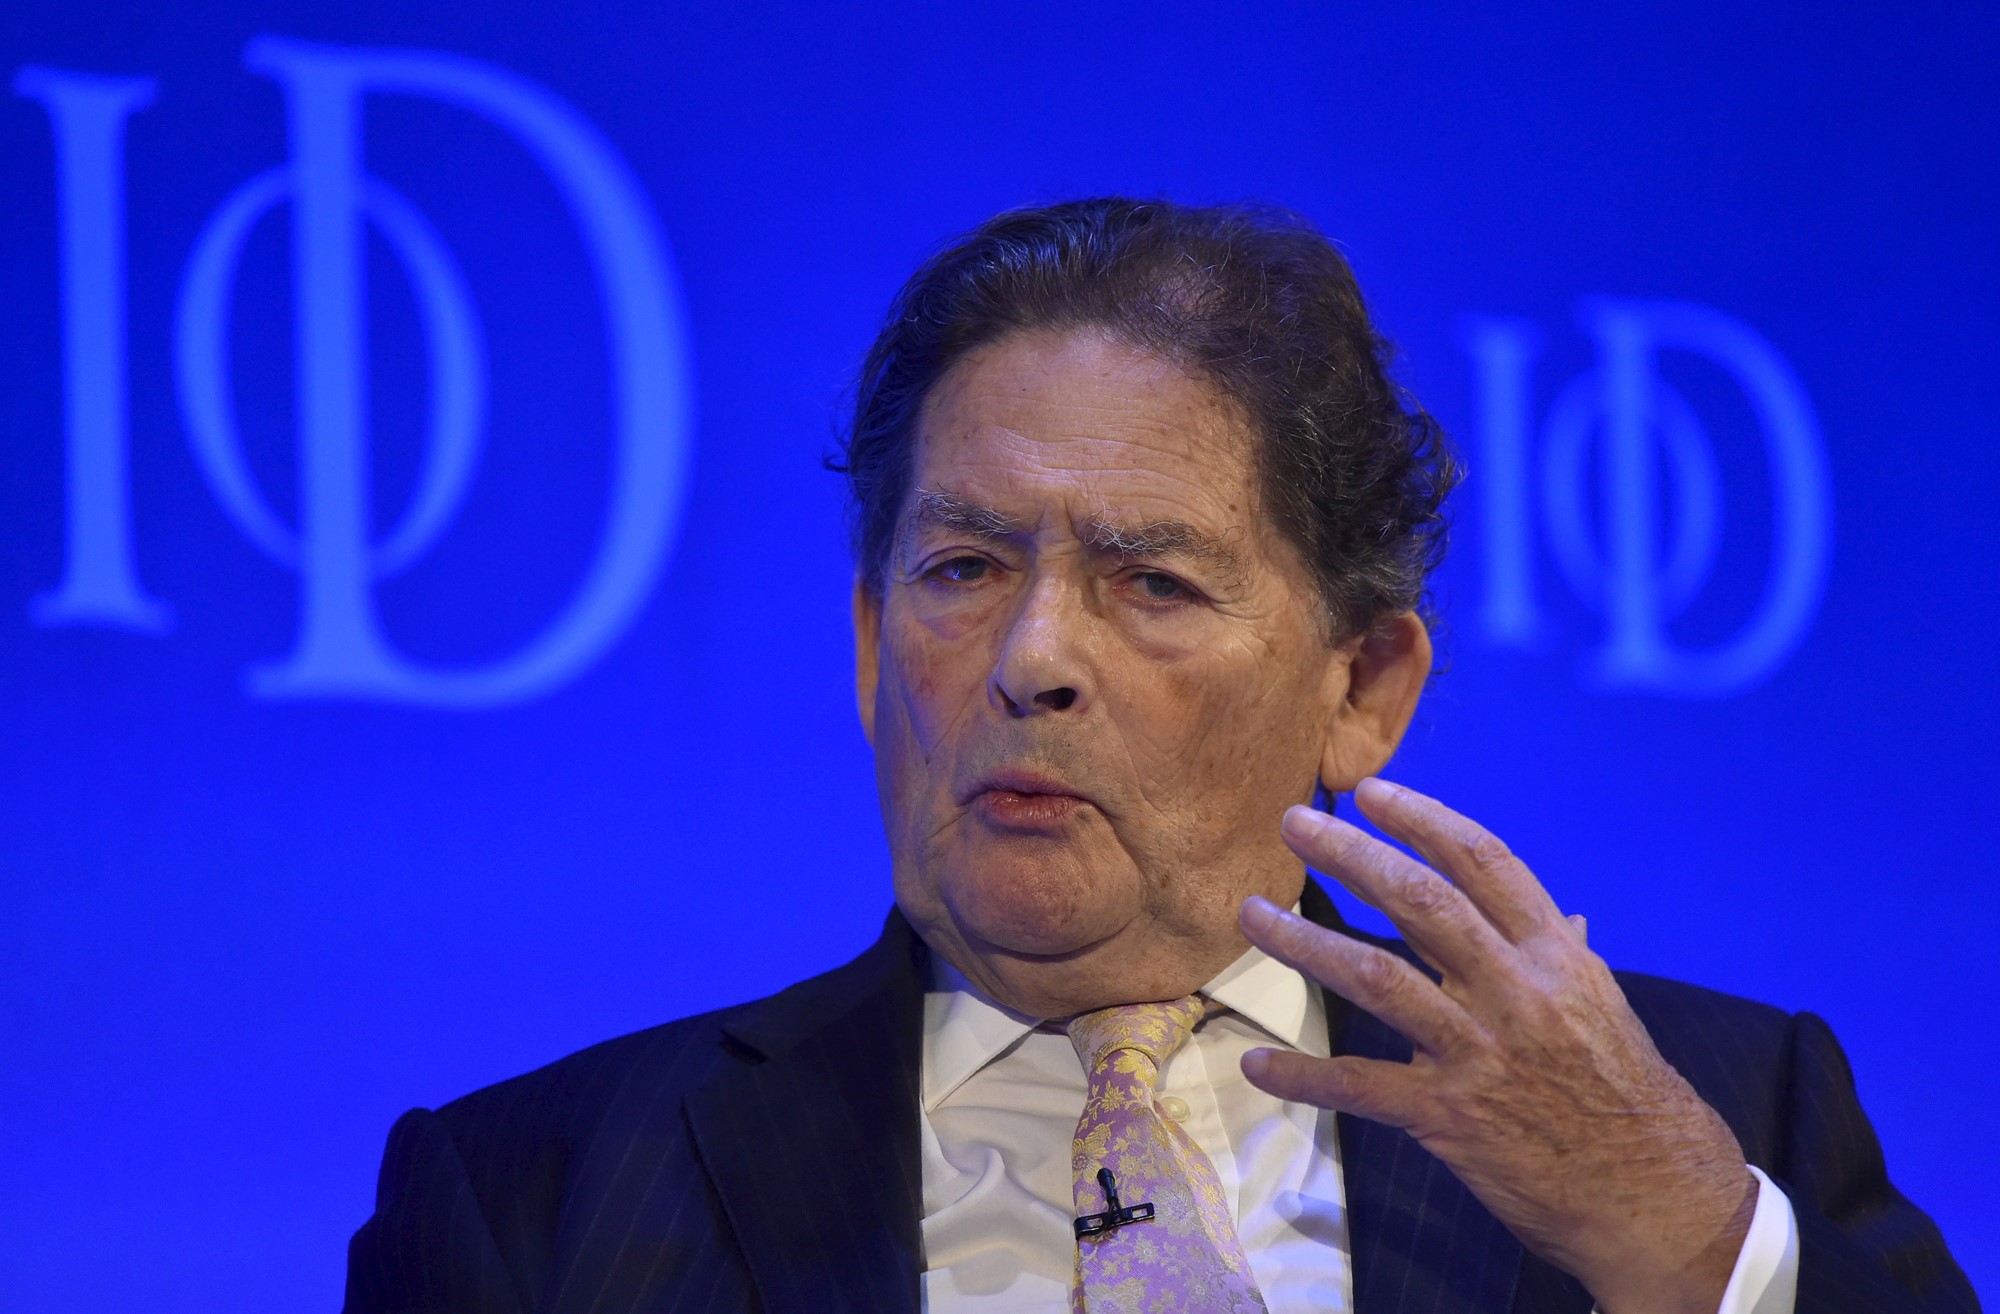 Nigel Lawson, wearing a suit, speaks and gestures with a hand